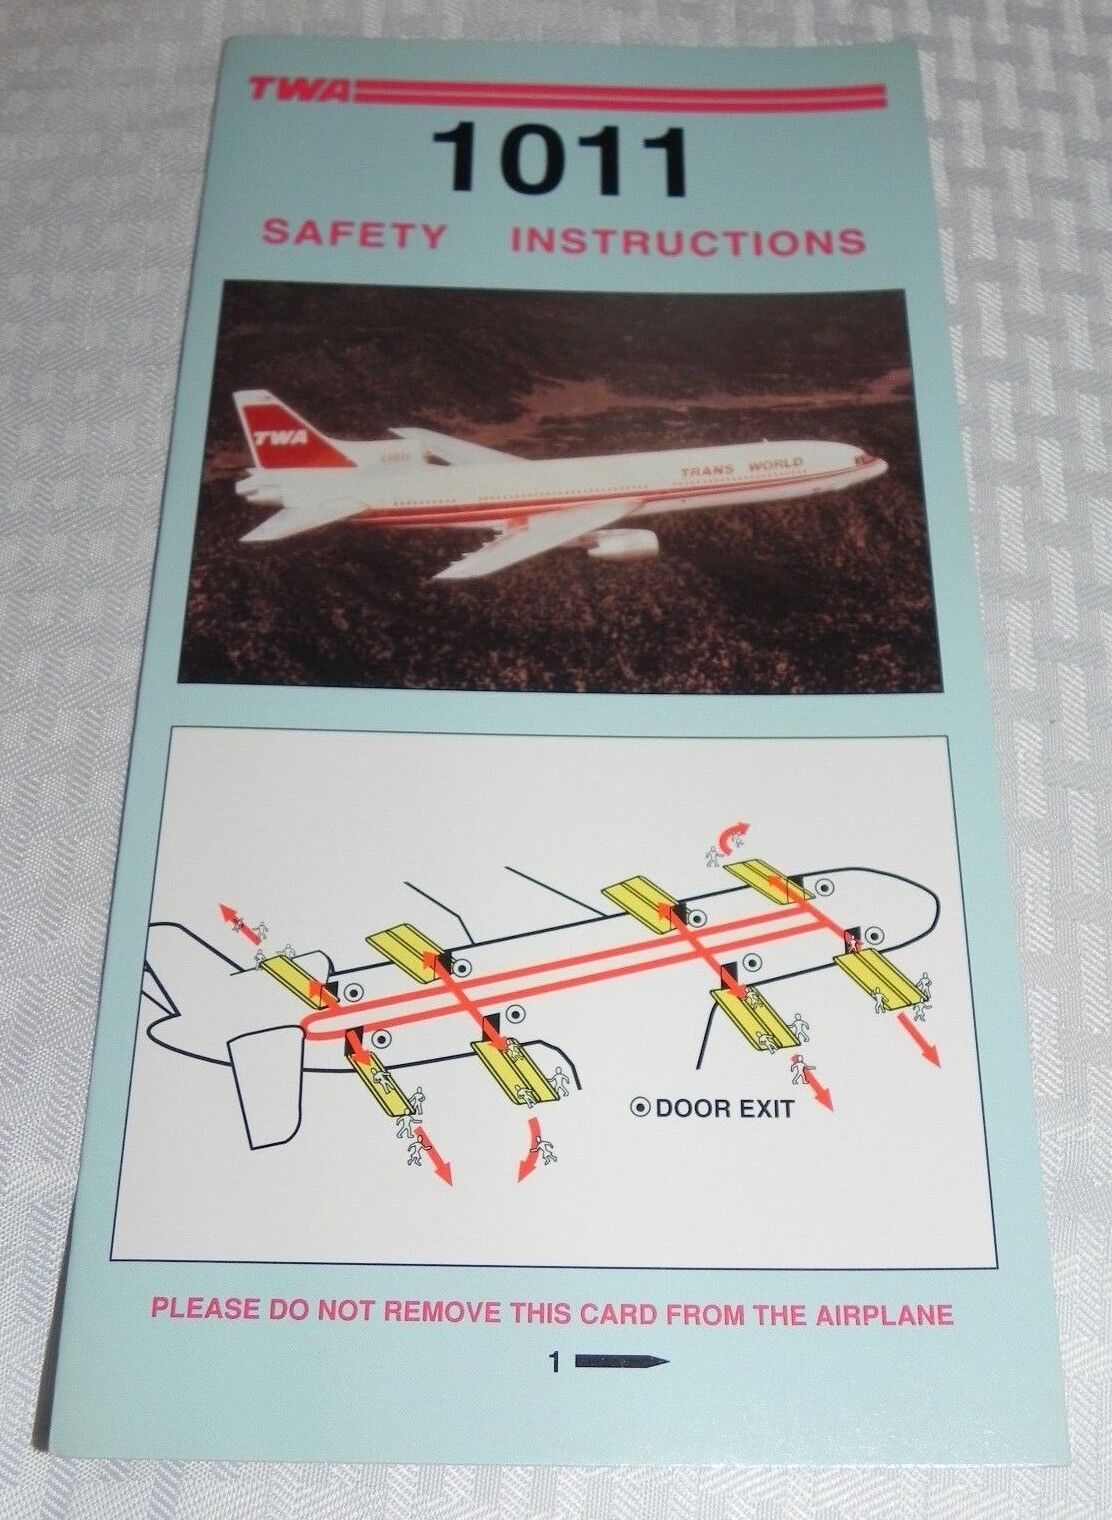 TWA LOCKHEED L-1011 SAFETY INSTRUCTIONS CARD EXCELLENT CONDITION 5/91 NOS